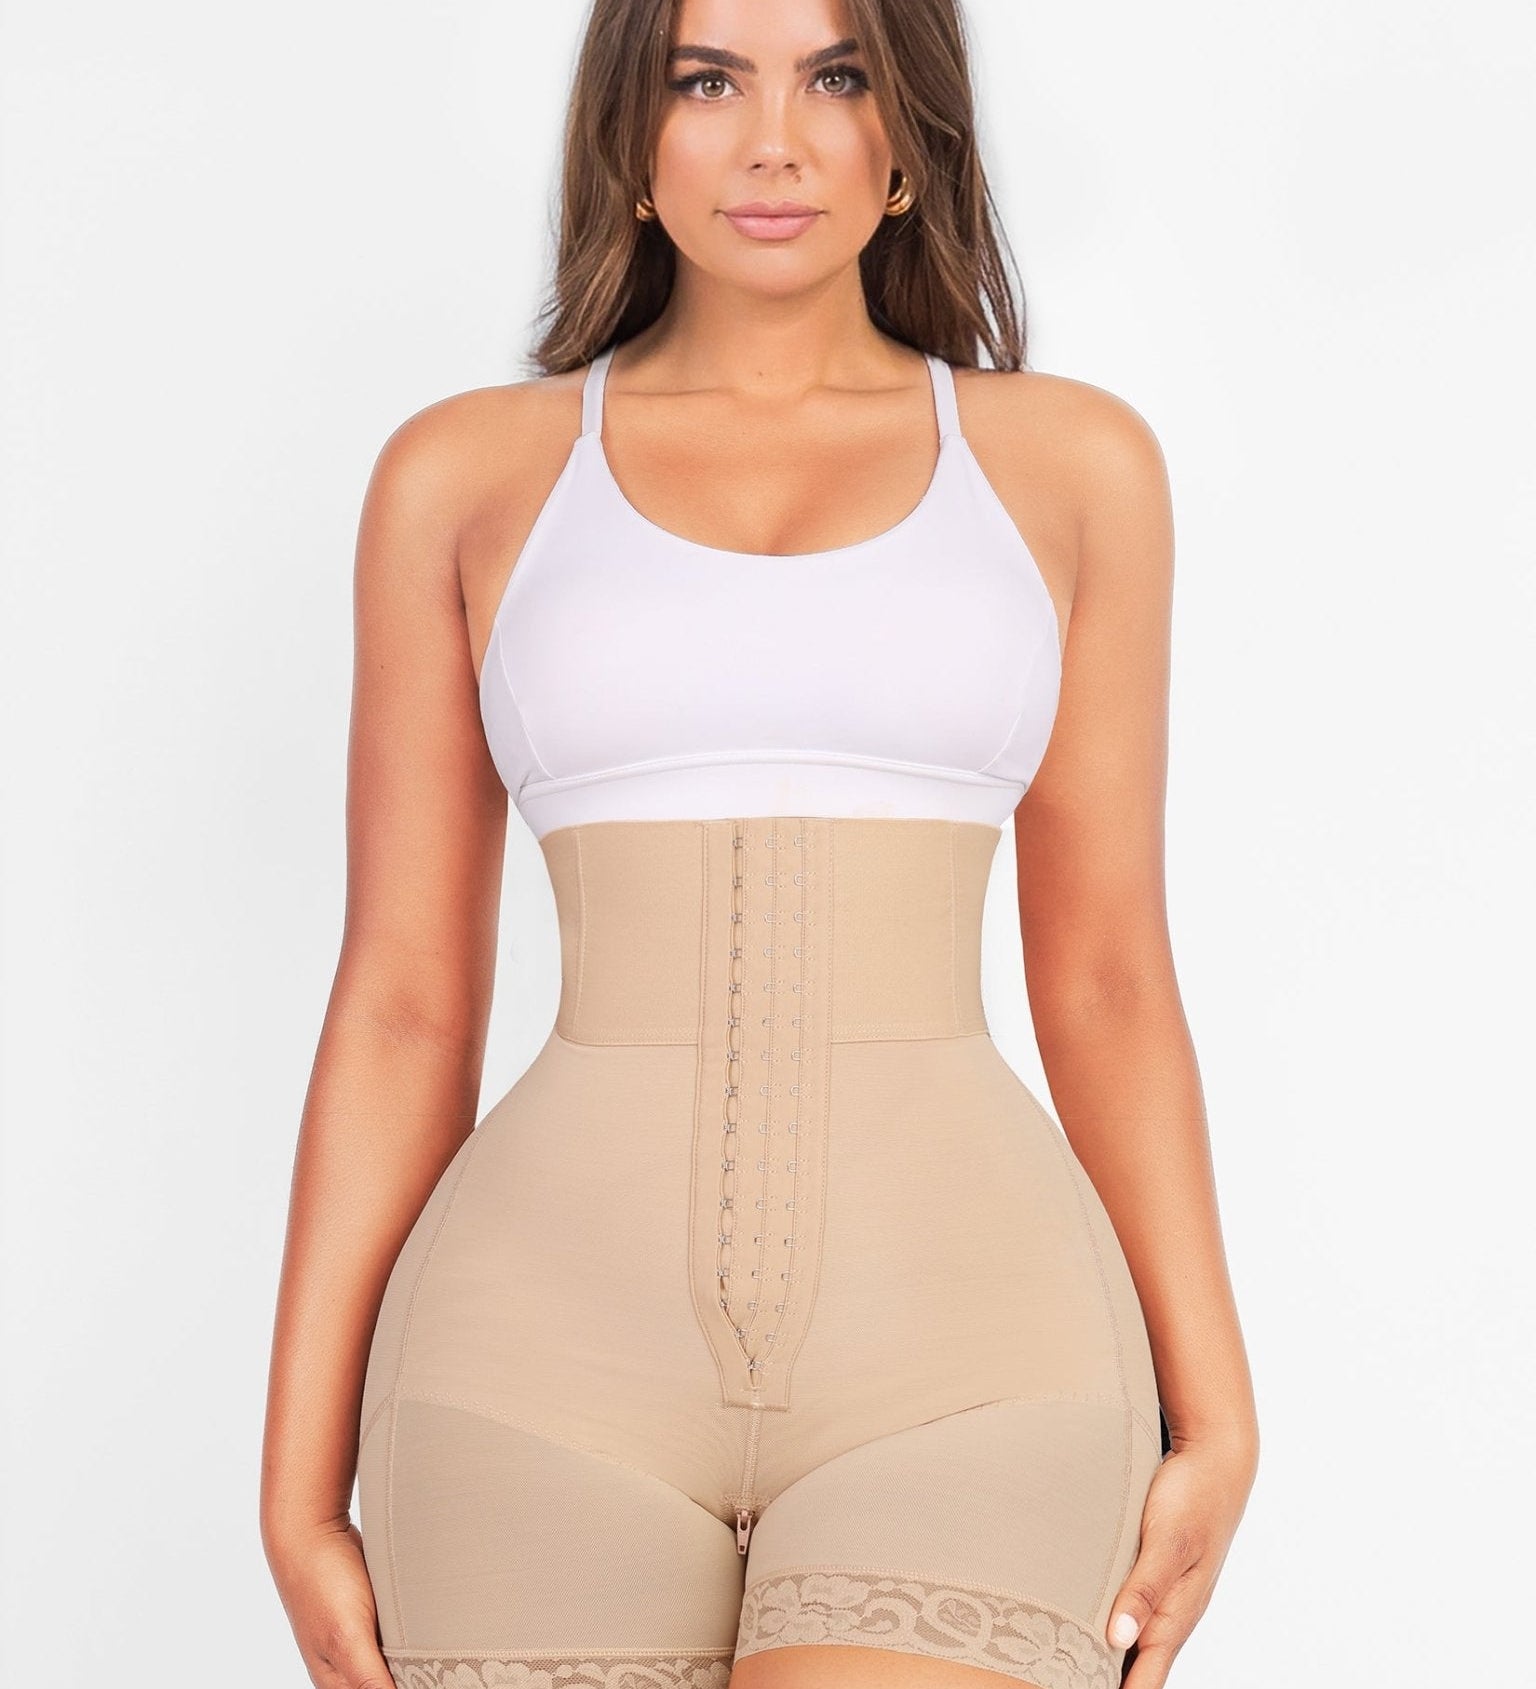 Valentina 2.0 - High-waisted body shaper for slimming